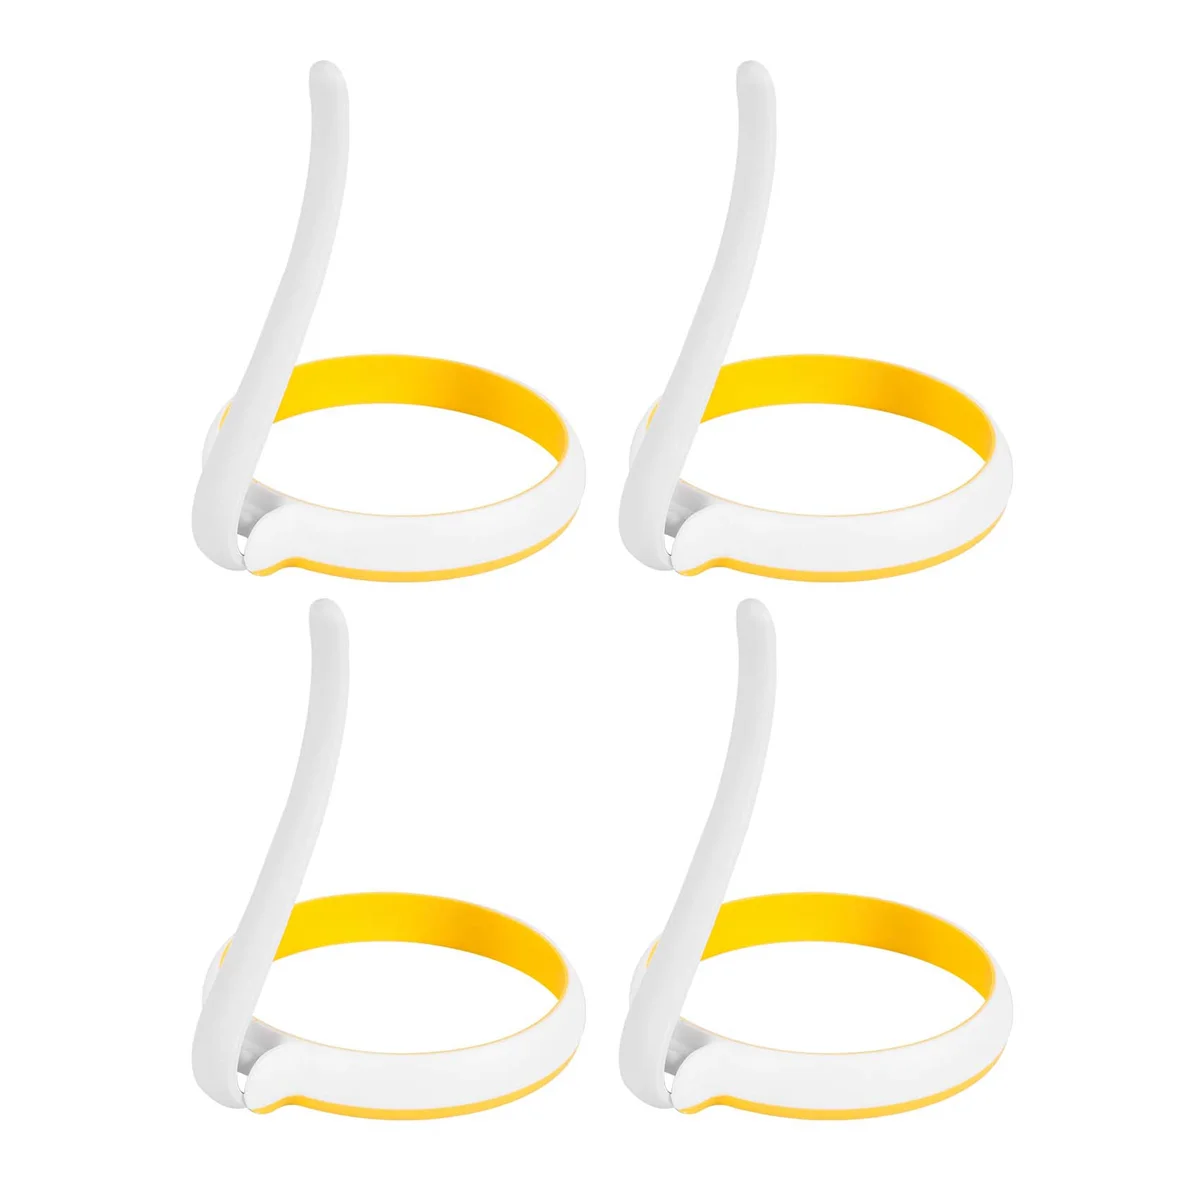 

4 inch Silicone Fried Egg Rings Set, 4-Pack, Round Mold for Pancakes, Breakfast Sandwich, Nonstick Egg Ring for Frying